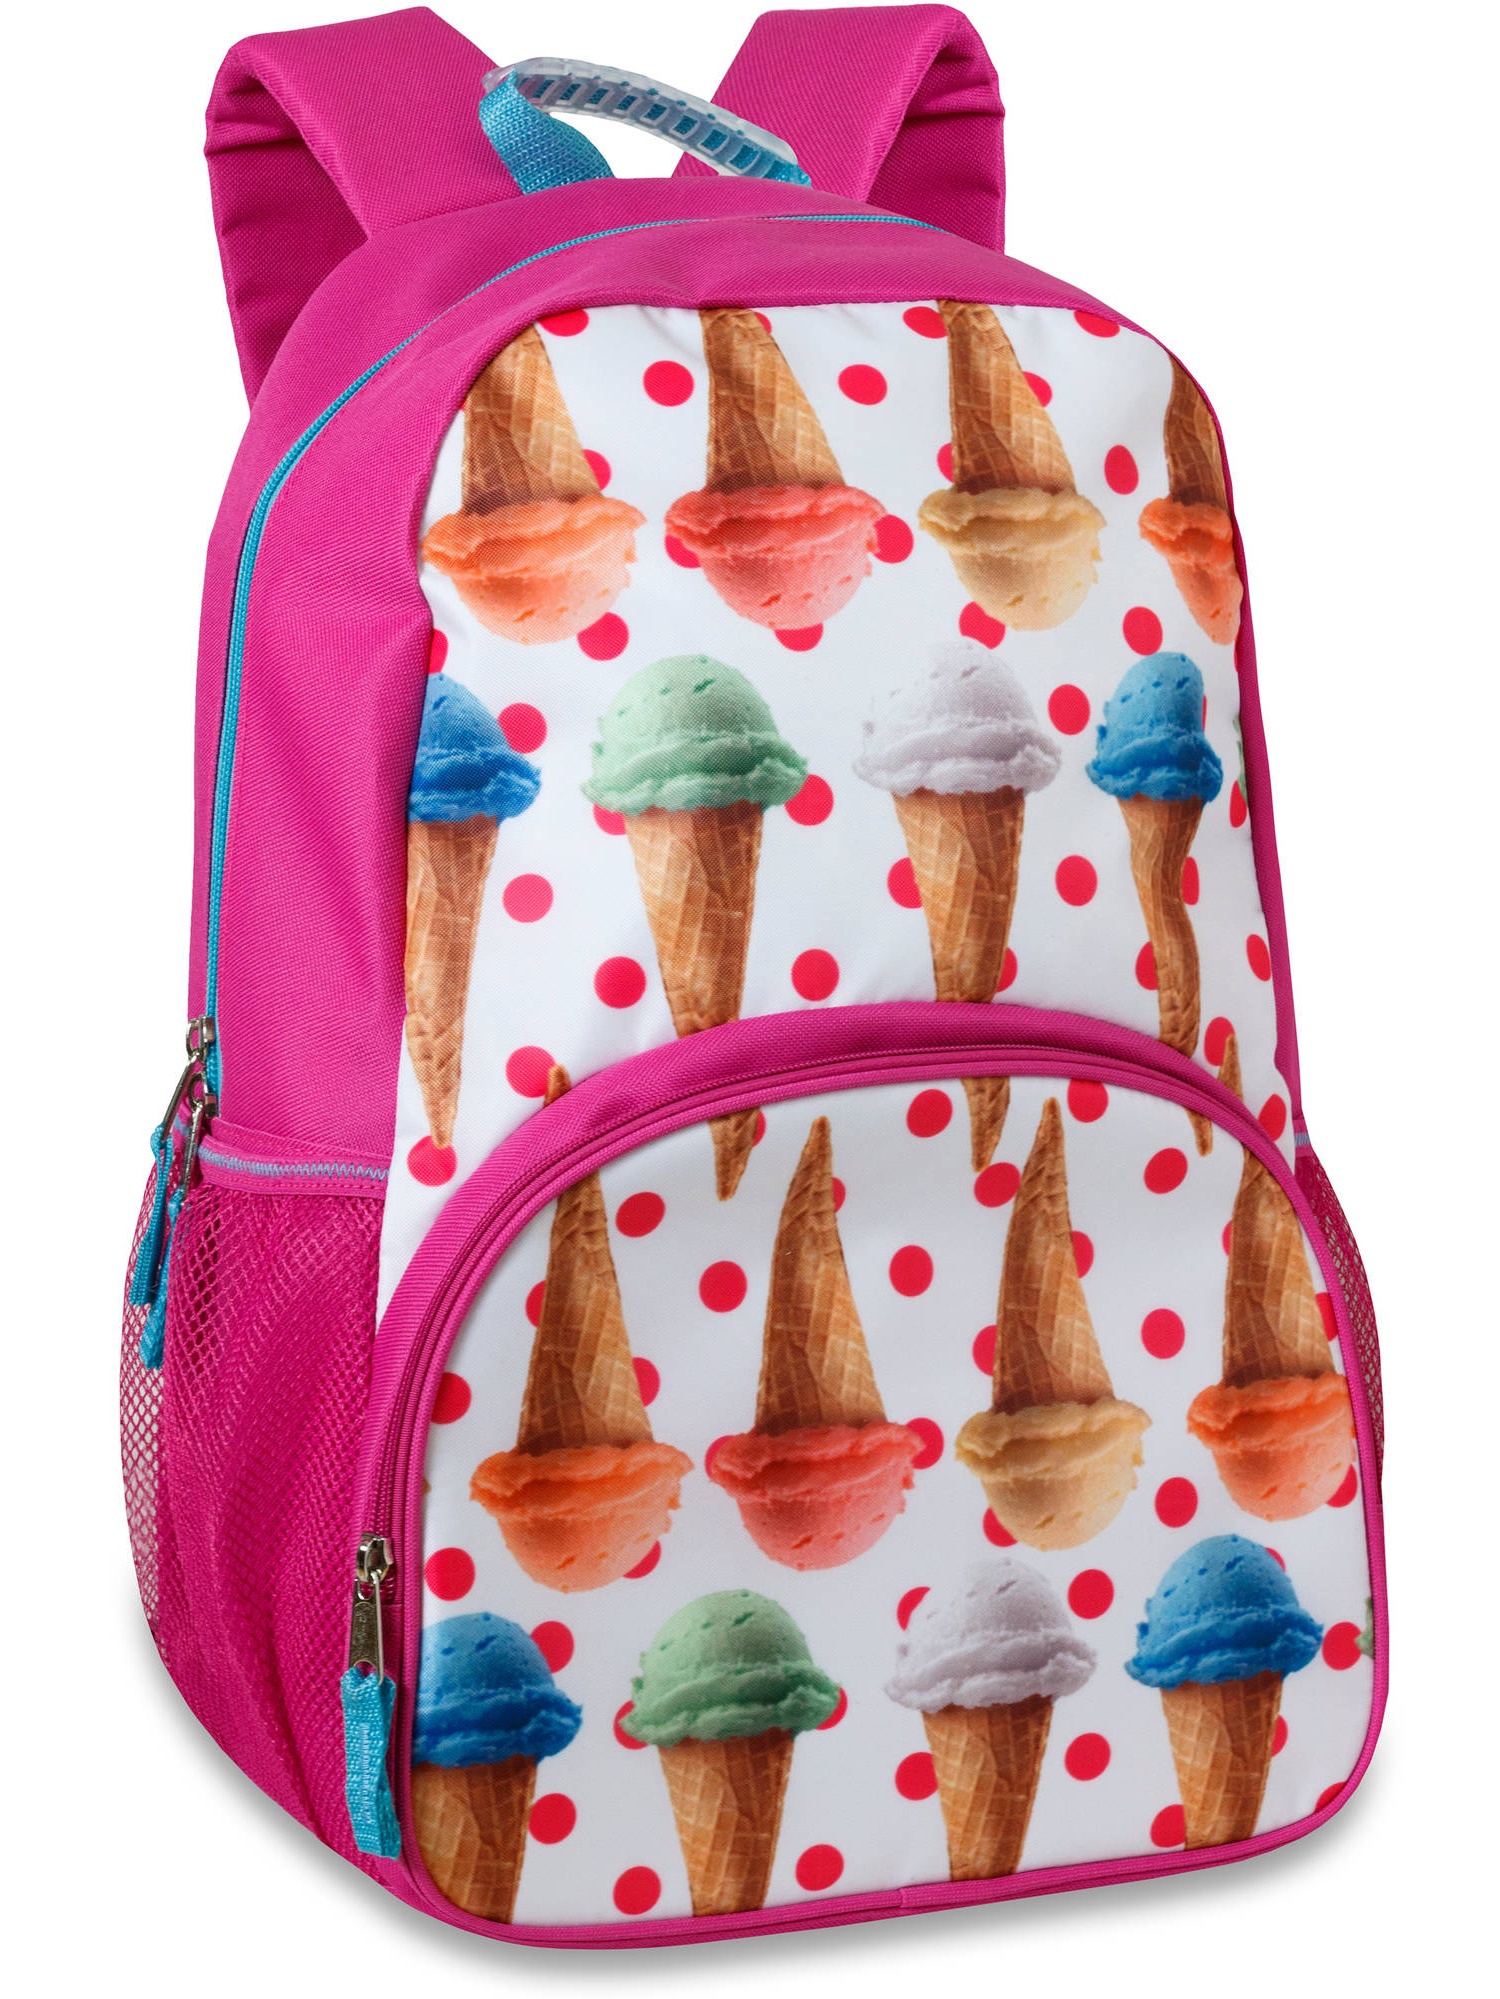 17.5 Inch Ice Cream Cones Photo Real Backpack - image 1 of 3